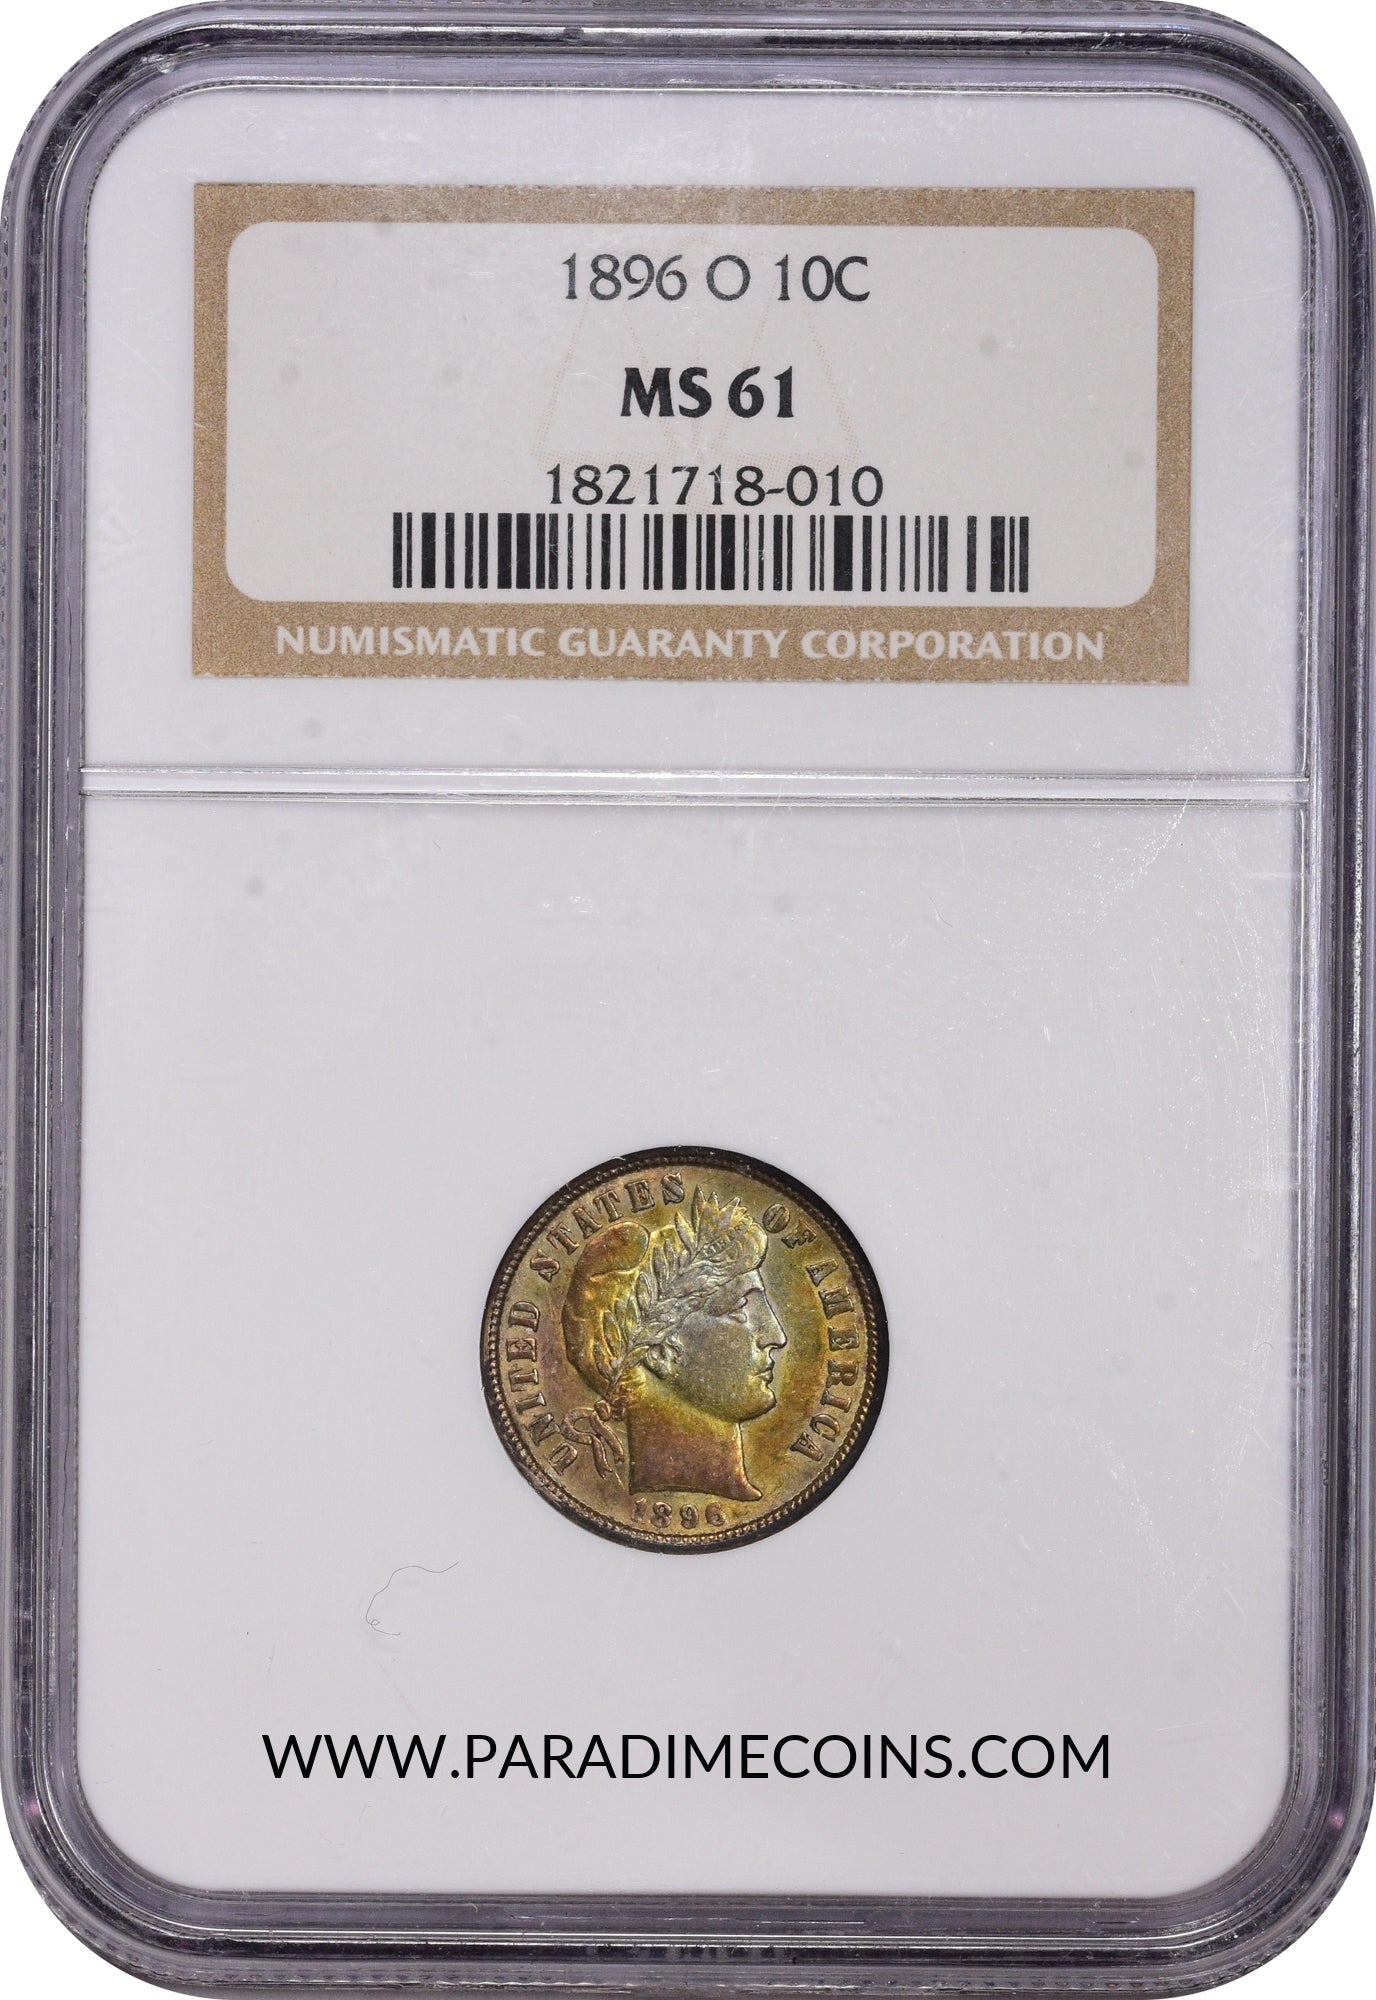 1896-O 10C MS61 NGC - Paradime Coins | PCGS NGC CACG CAC Rare US Numismatic Coins For Sale